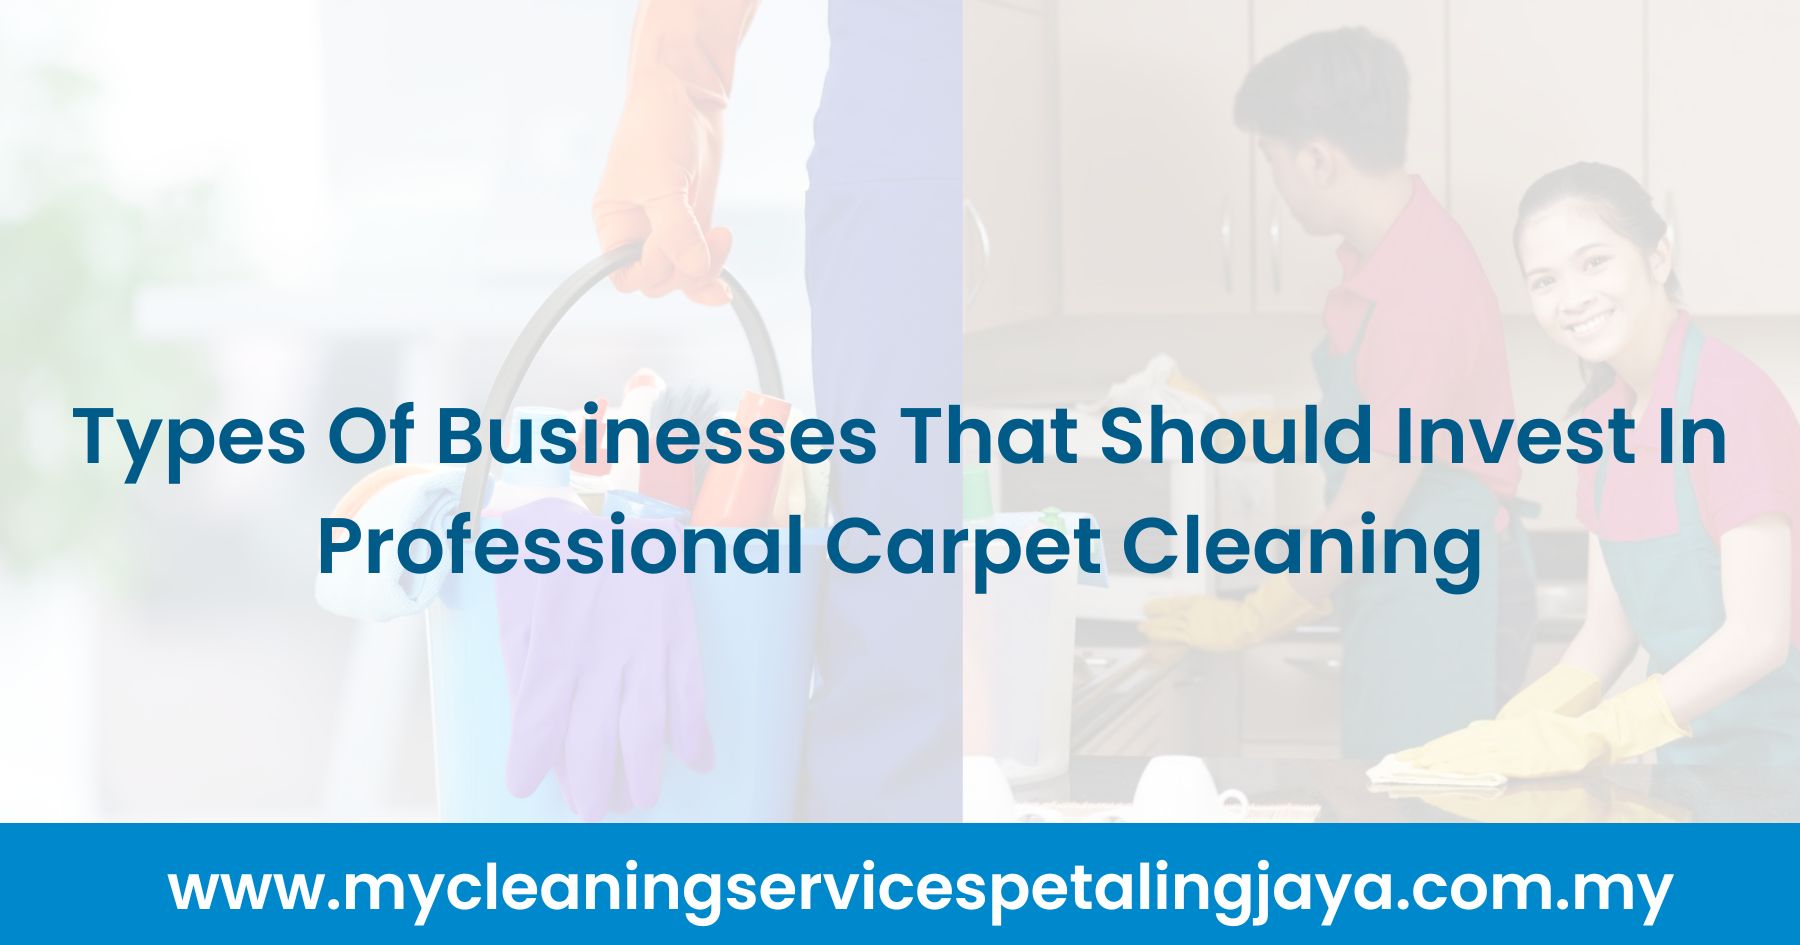 Types Of Businesses That Should Invest In Professional Carpet Cleaning